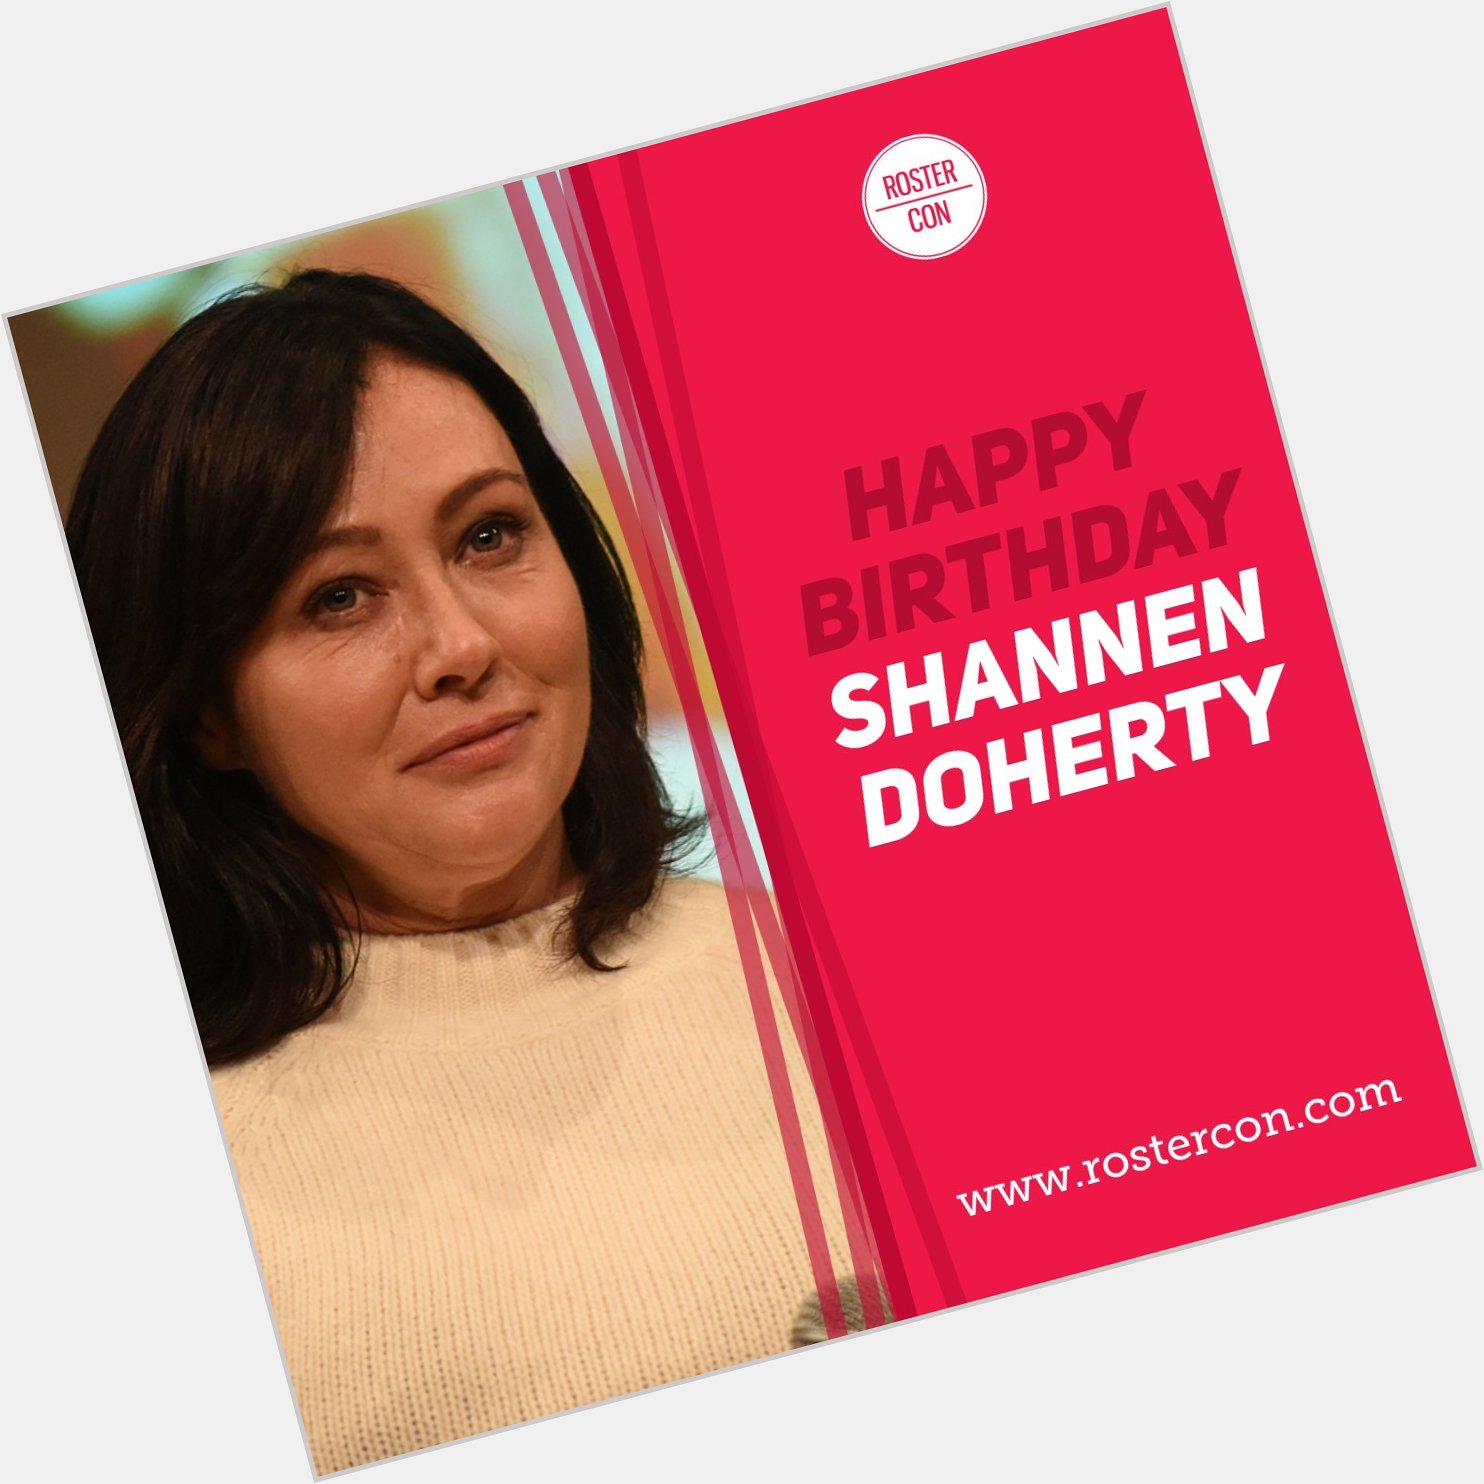  Happy Birthday Shannen Doherty ! Souvenirs / Throwback :  